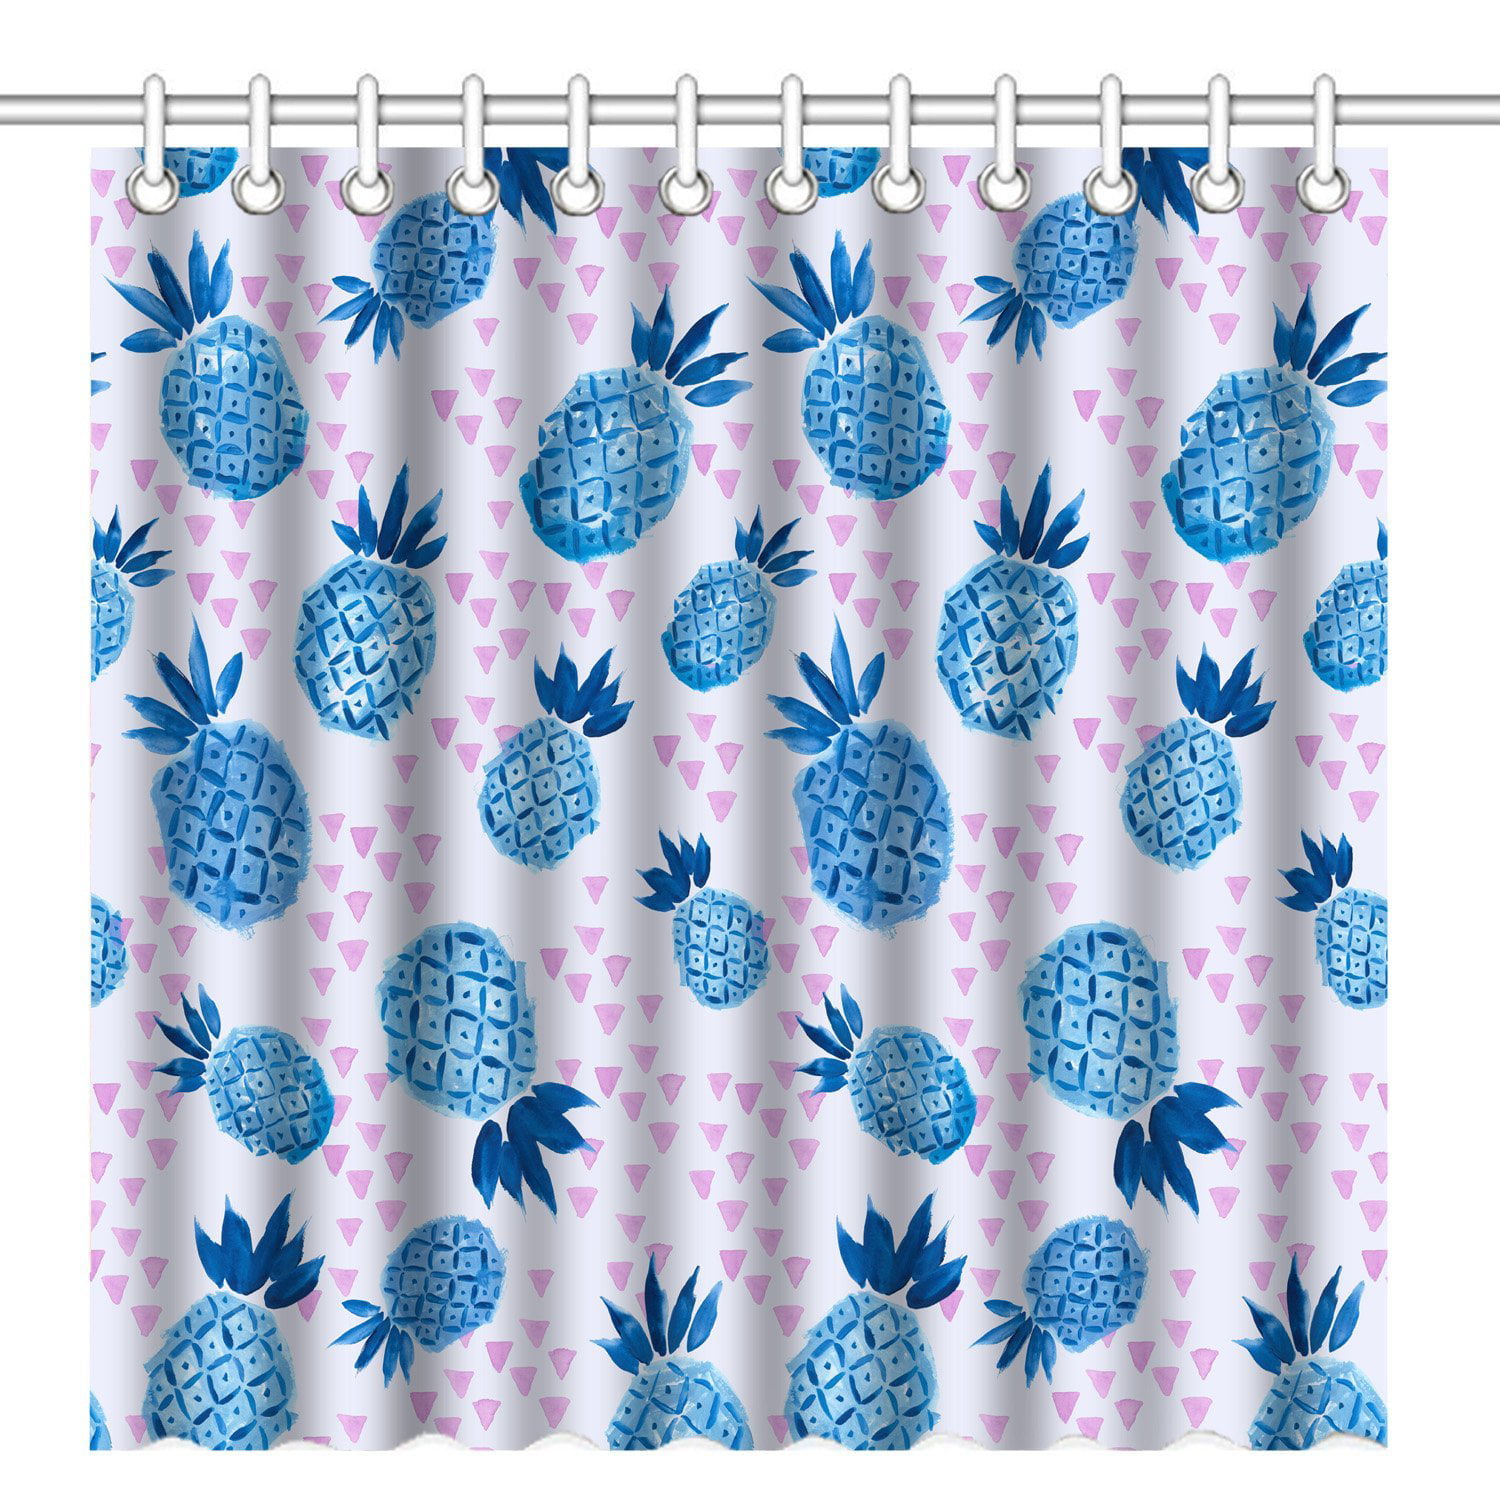 Watercolor Pineapple Polyester Waterproof Fabric Shower Curtain Set Bath Curtain 